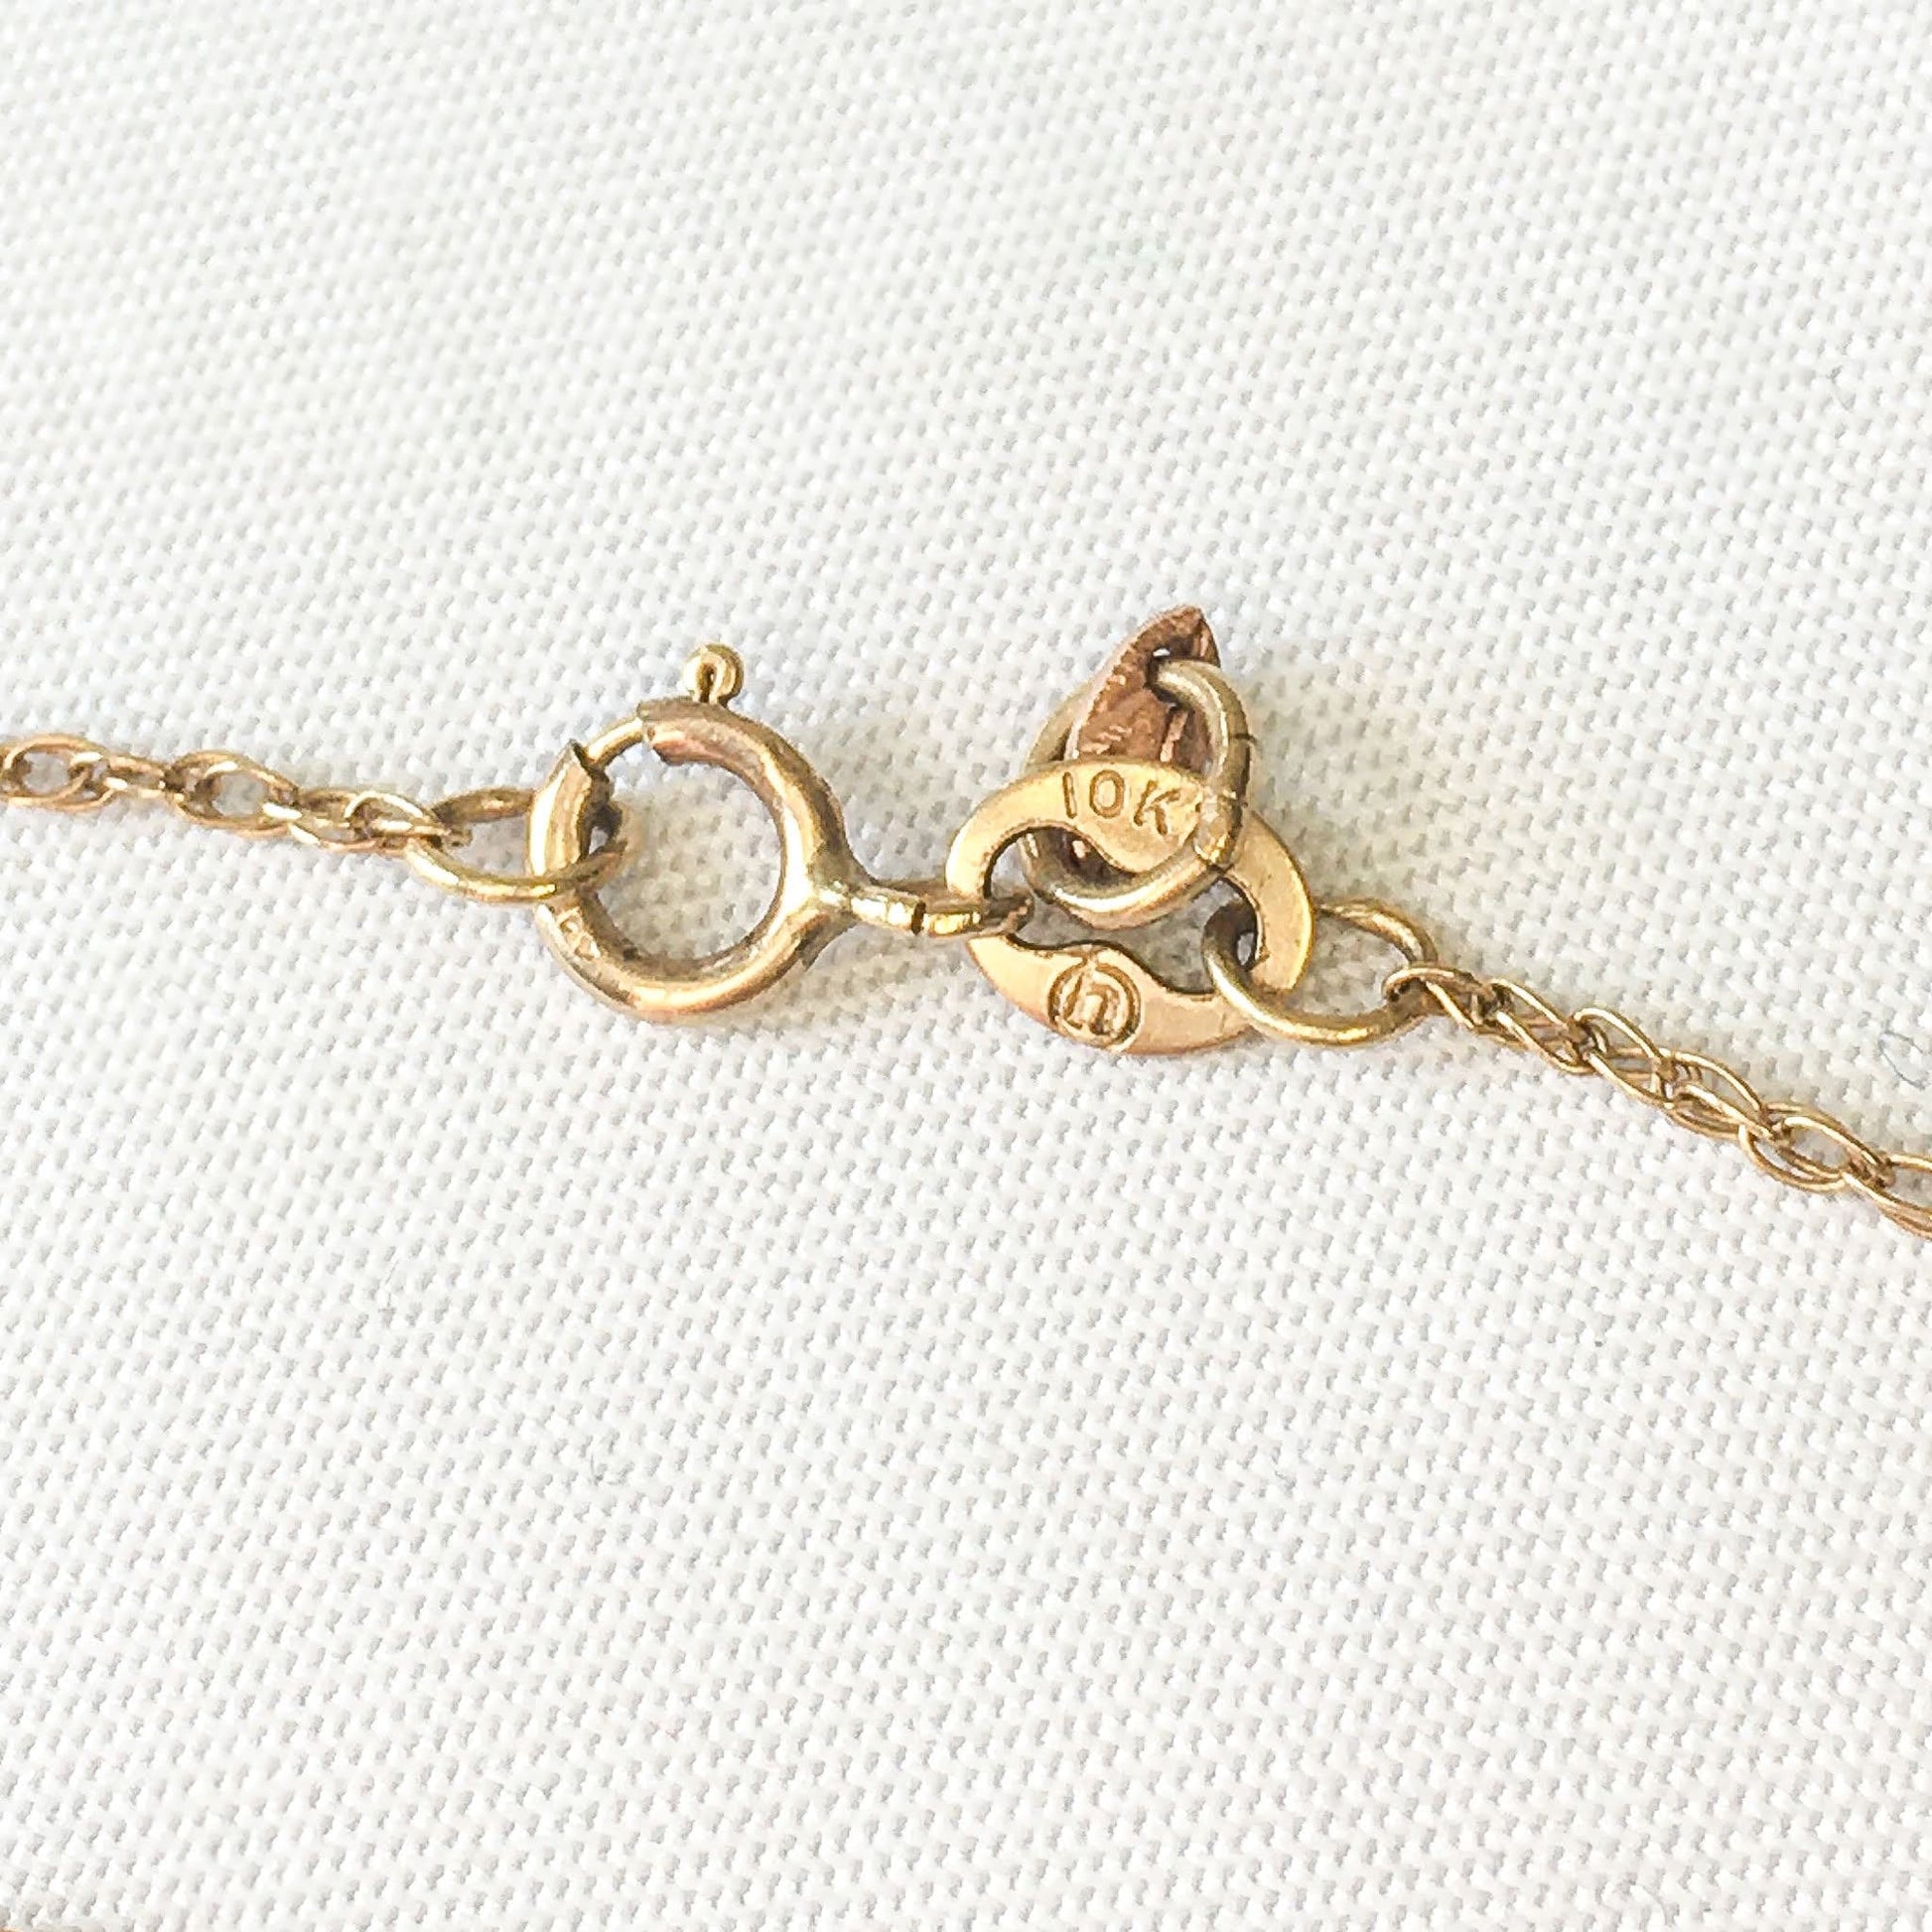 Vintage Hitchcock Chain Company 10k Gold Chain Bracelet with Small Rose Charm, Vintage Gold Chains